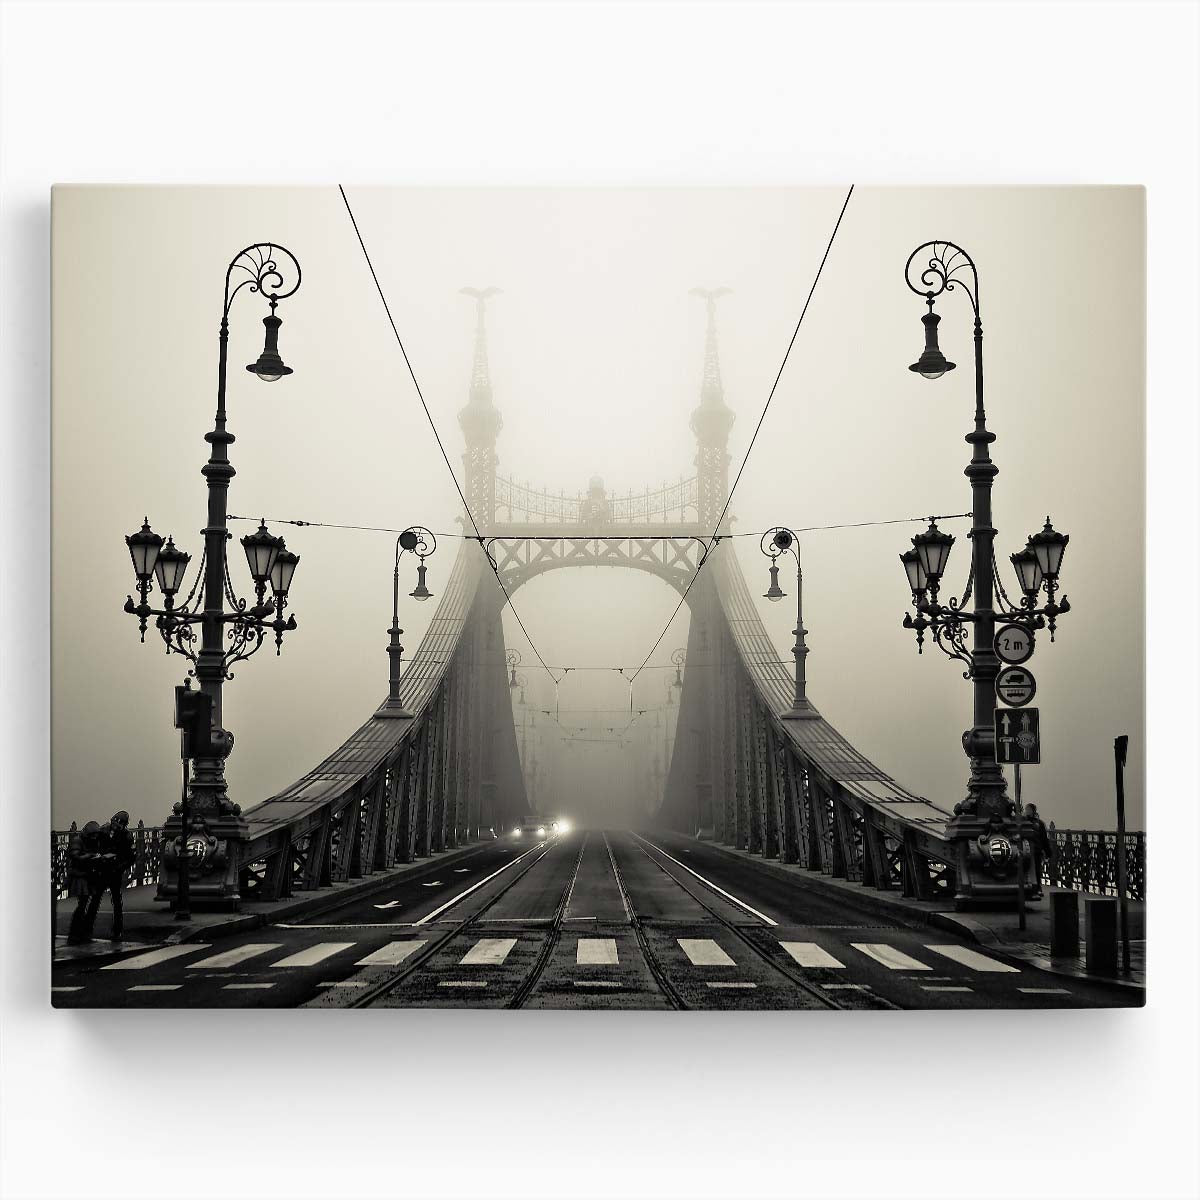 Foggy Budapest Liberty Bridge Iconic View Wall Art by Luxuriance Designs. Made in USA.